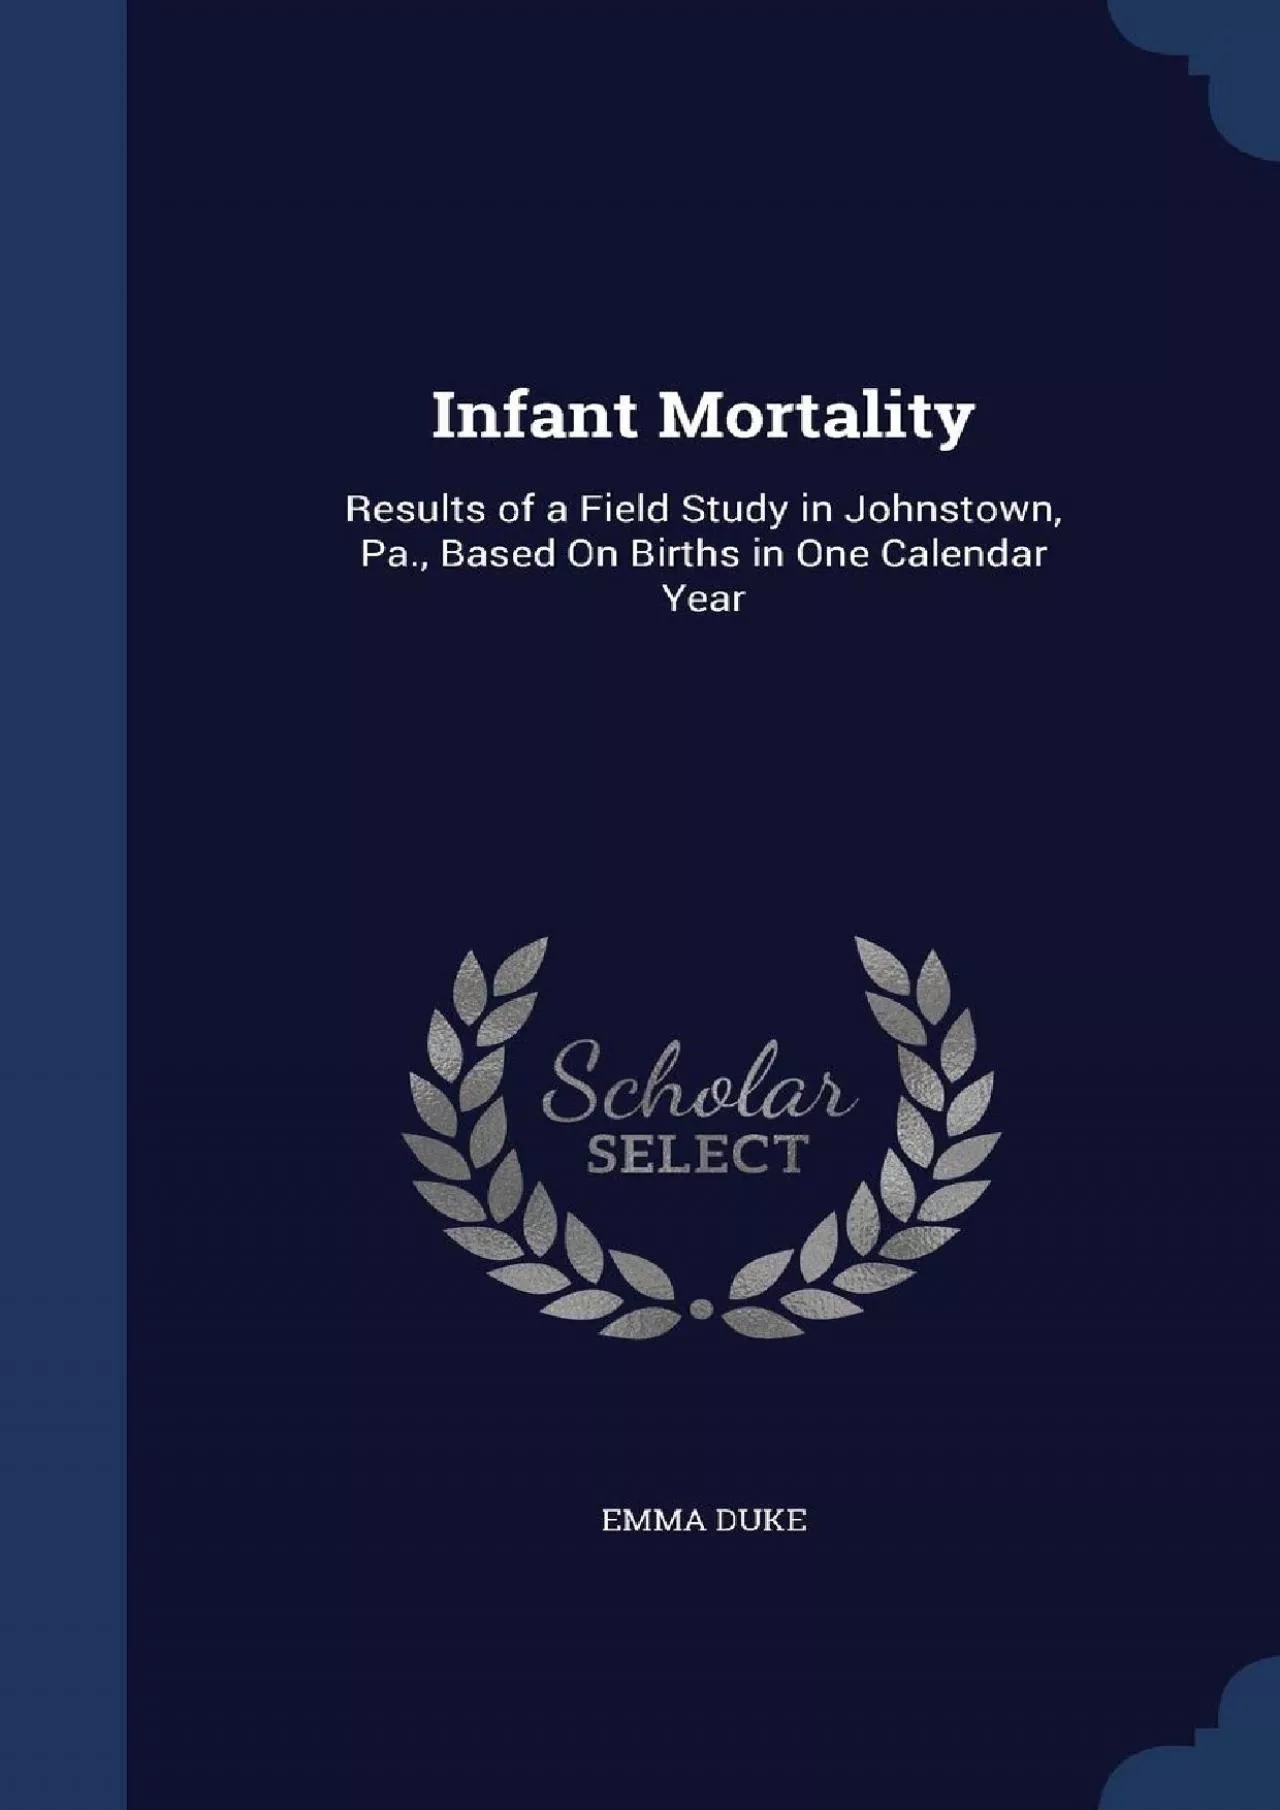 (BOOS)-Infant Mortality: Results of a Field Study in Johnstown, Pa., Based On Births in